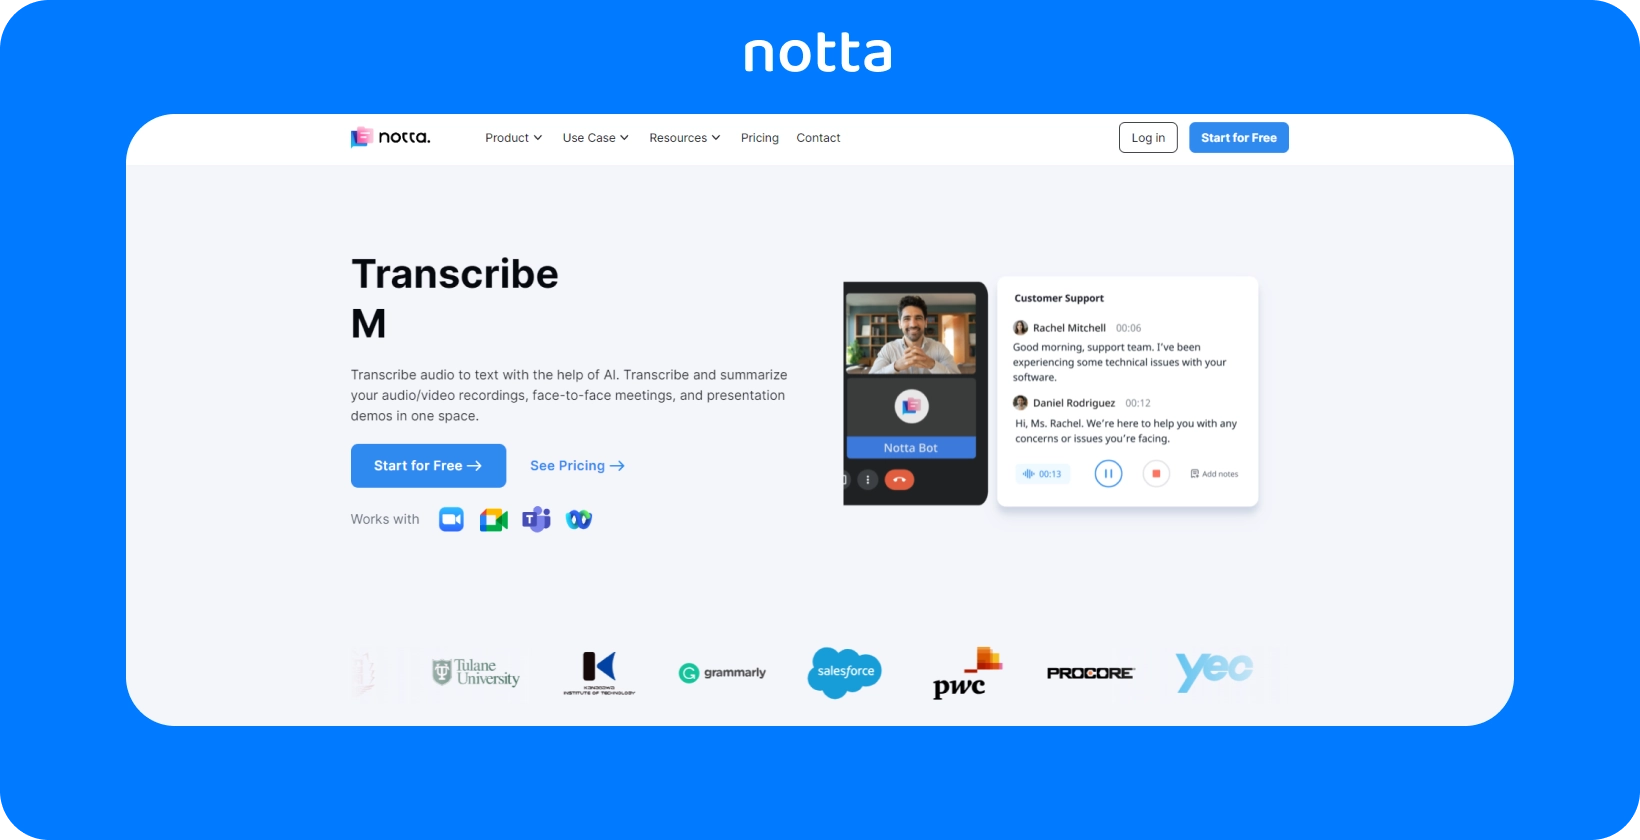 Webpage of Notta showcasing AI-powered transcription for audio and video meetings with a clear, user-centric interface.